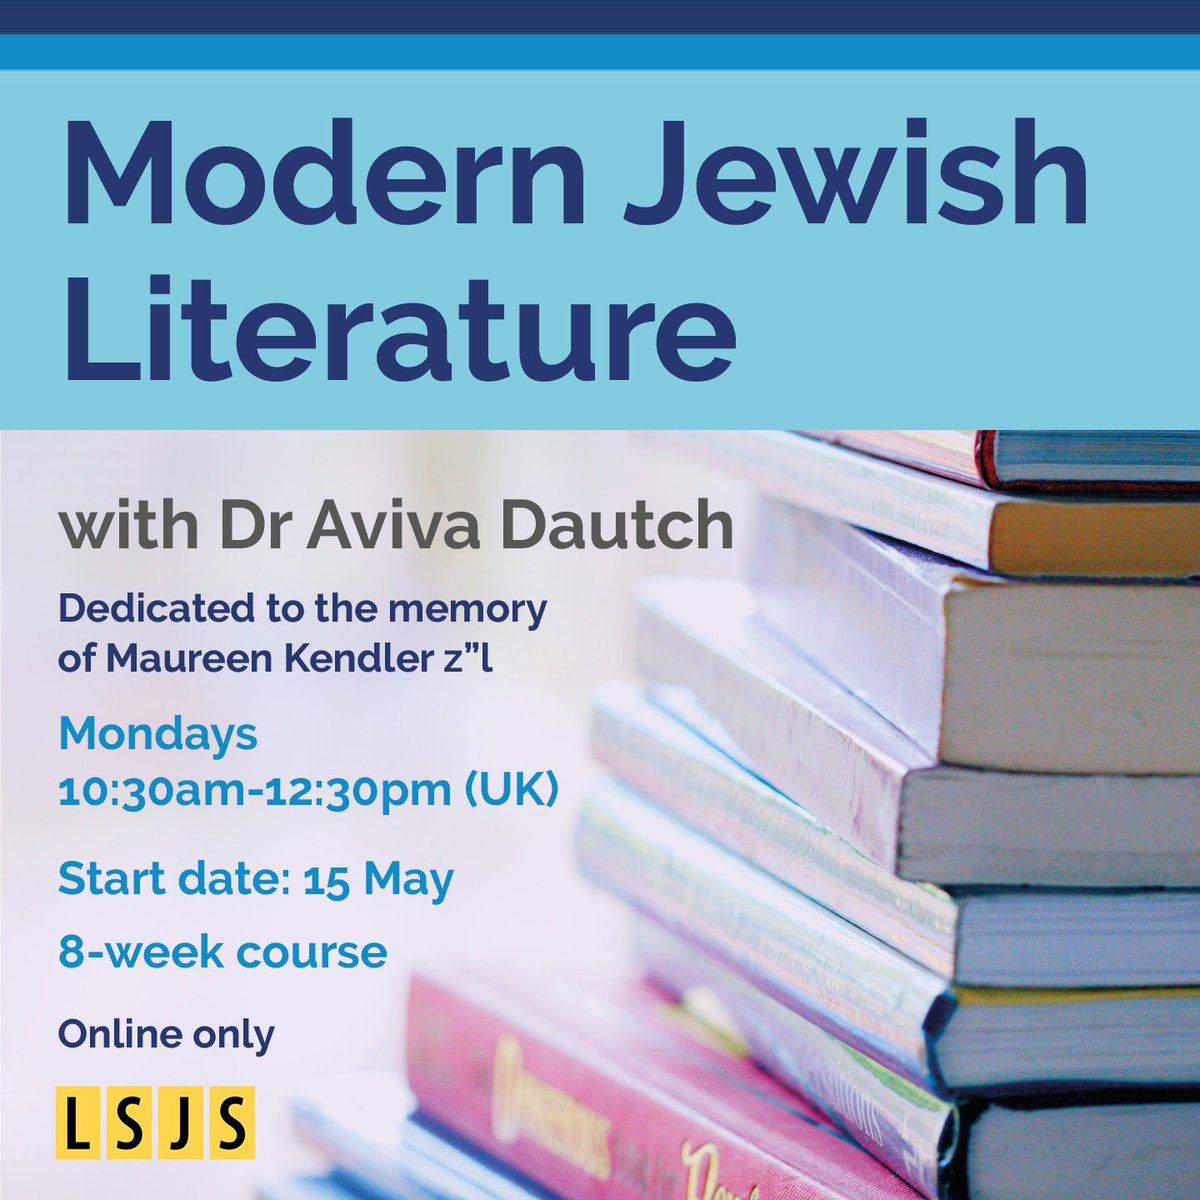 📚 Calling all literature lovers! @AvivaDautch's Modern Jewish Literature series returns tomorrow for eight weeks. Hosted by @LSJS_Hendon. 💻 Online 🕙 10.30am-12.30pm 🎟 £88 full course, £12 per session lsjs.ac.uk/modern-jewish-…